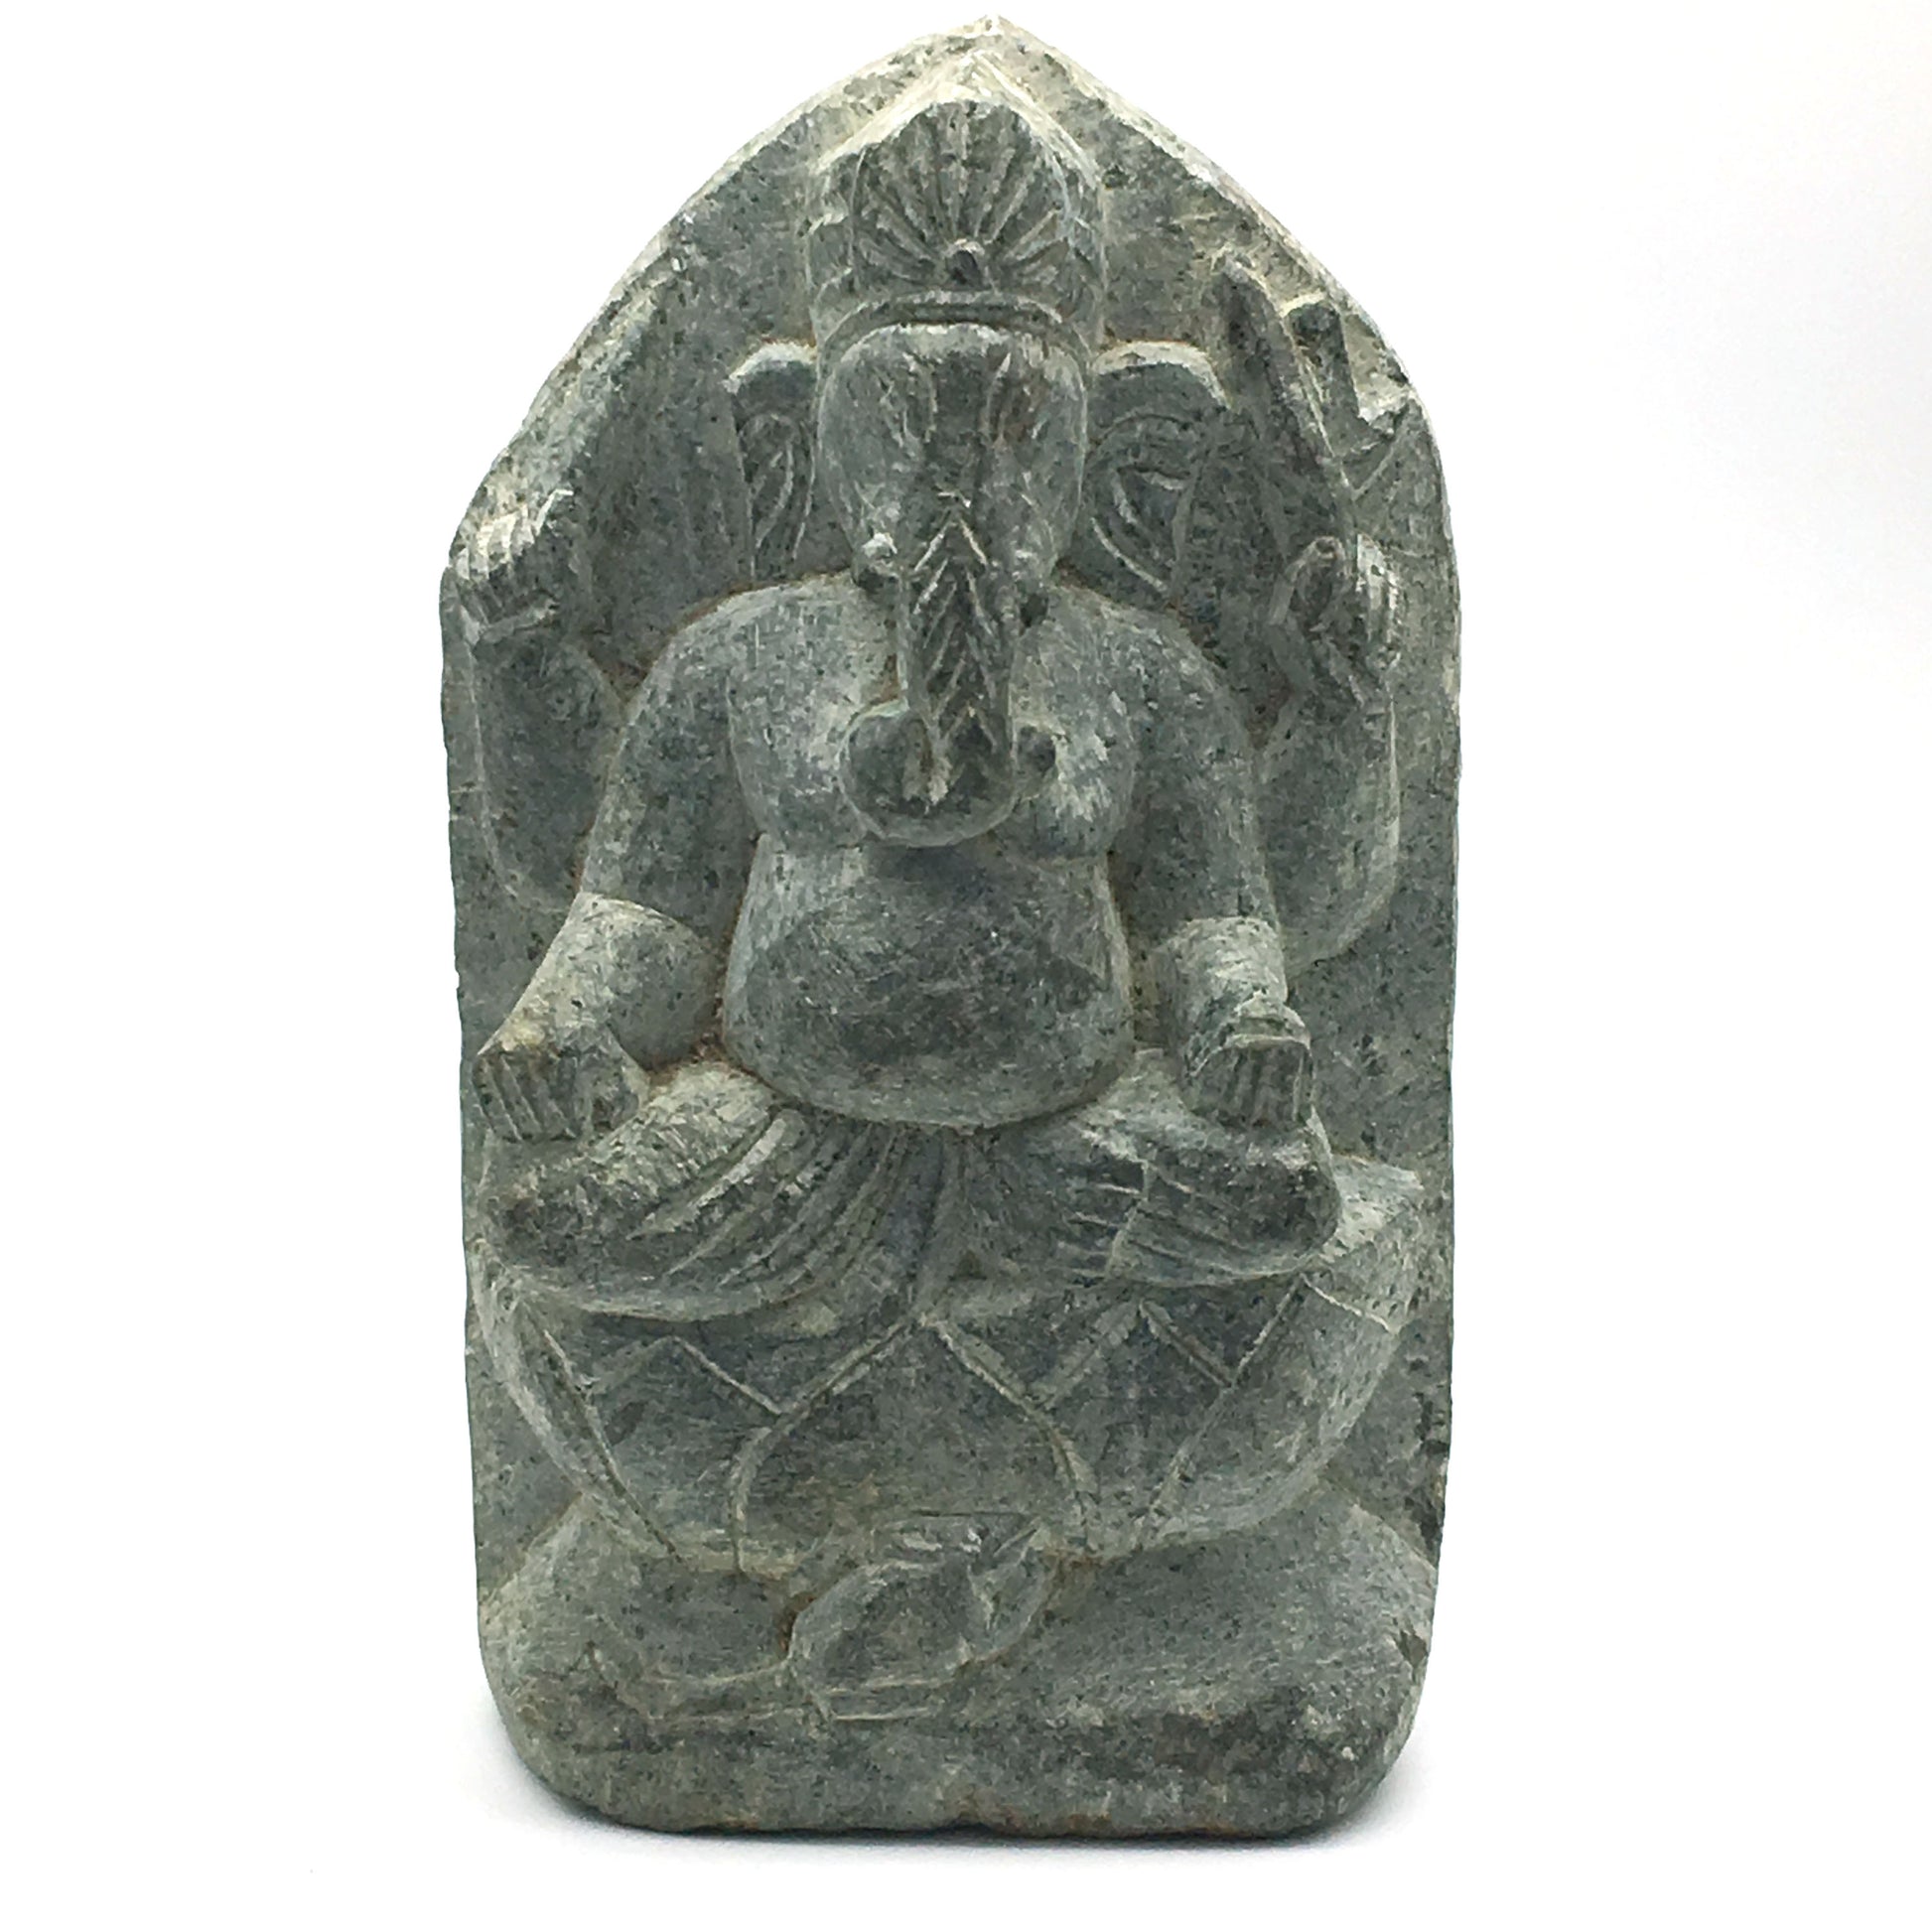 Solid Stone Hand-carved Ganesh Ganapati India Elephant God Sculpture Figure 7.5" - Montecinos Ethnic